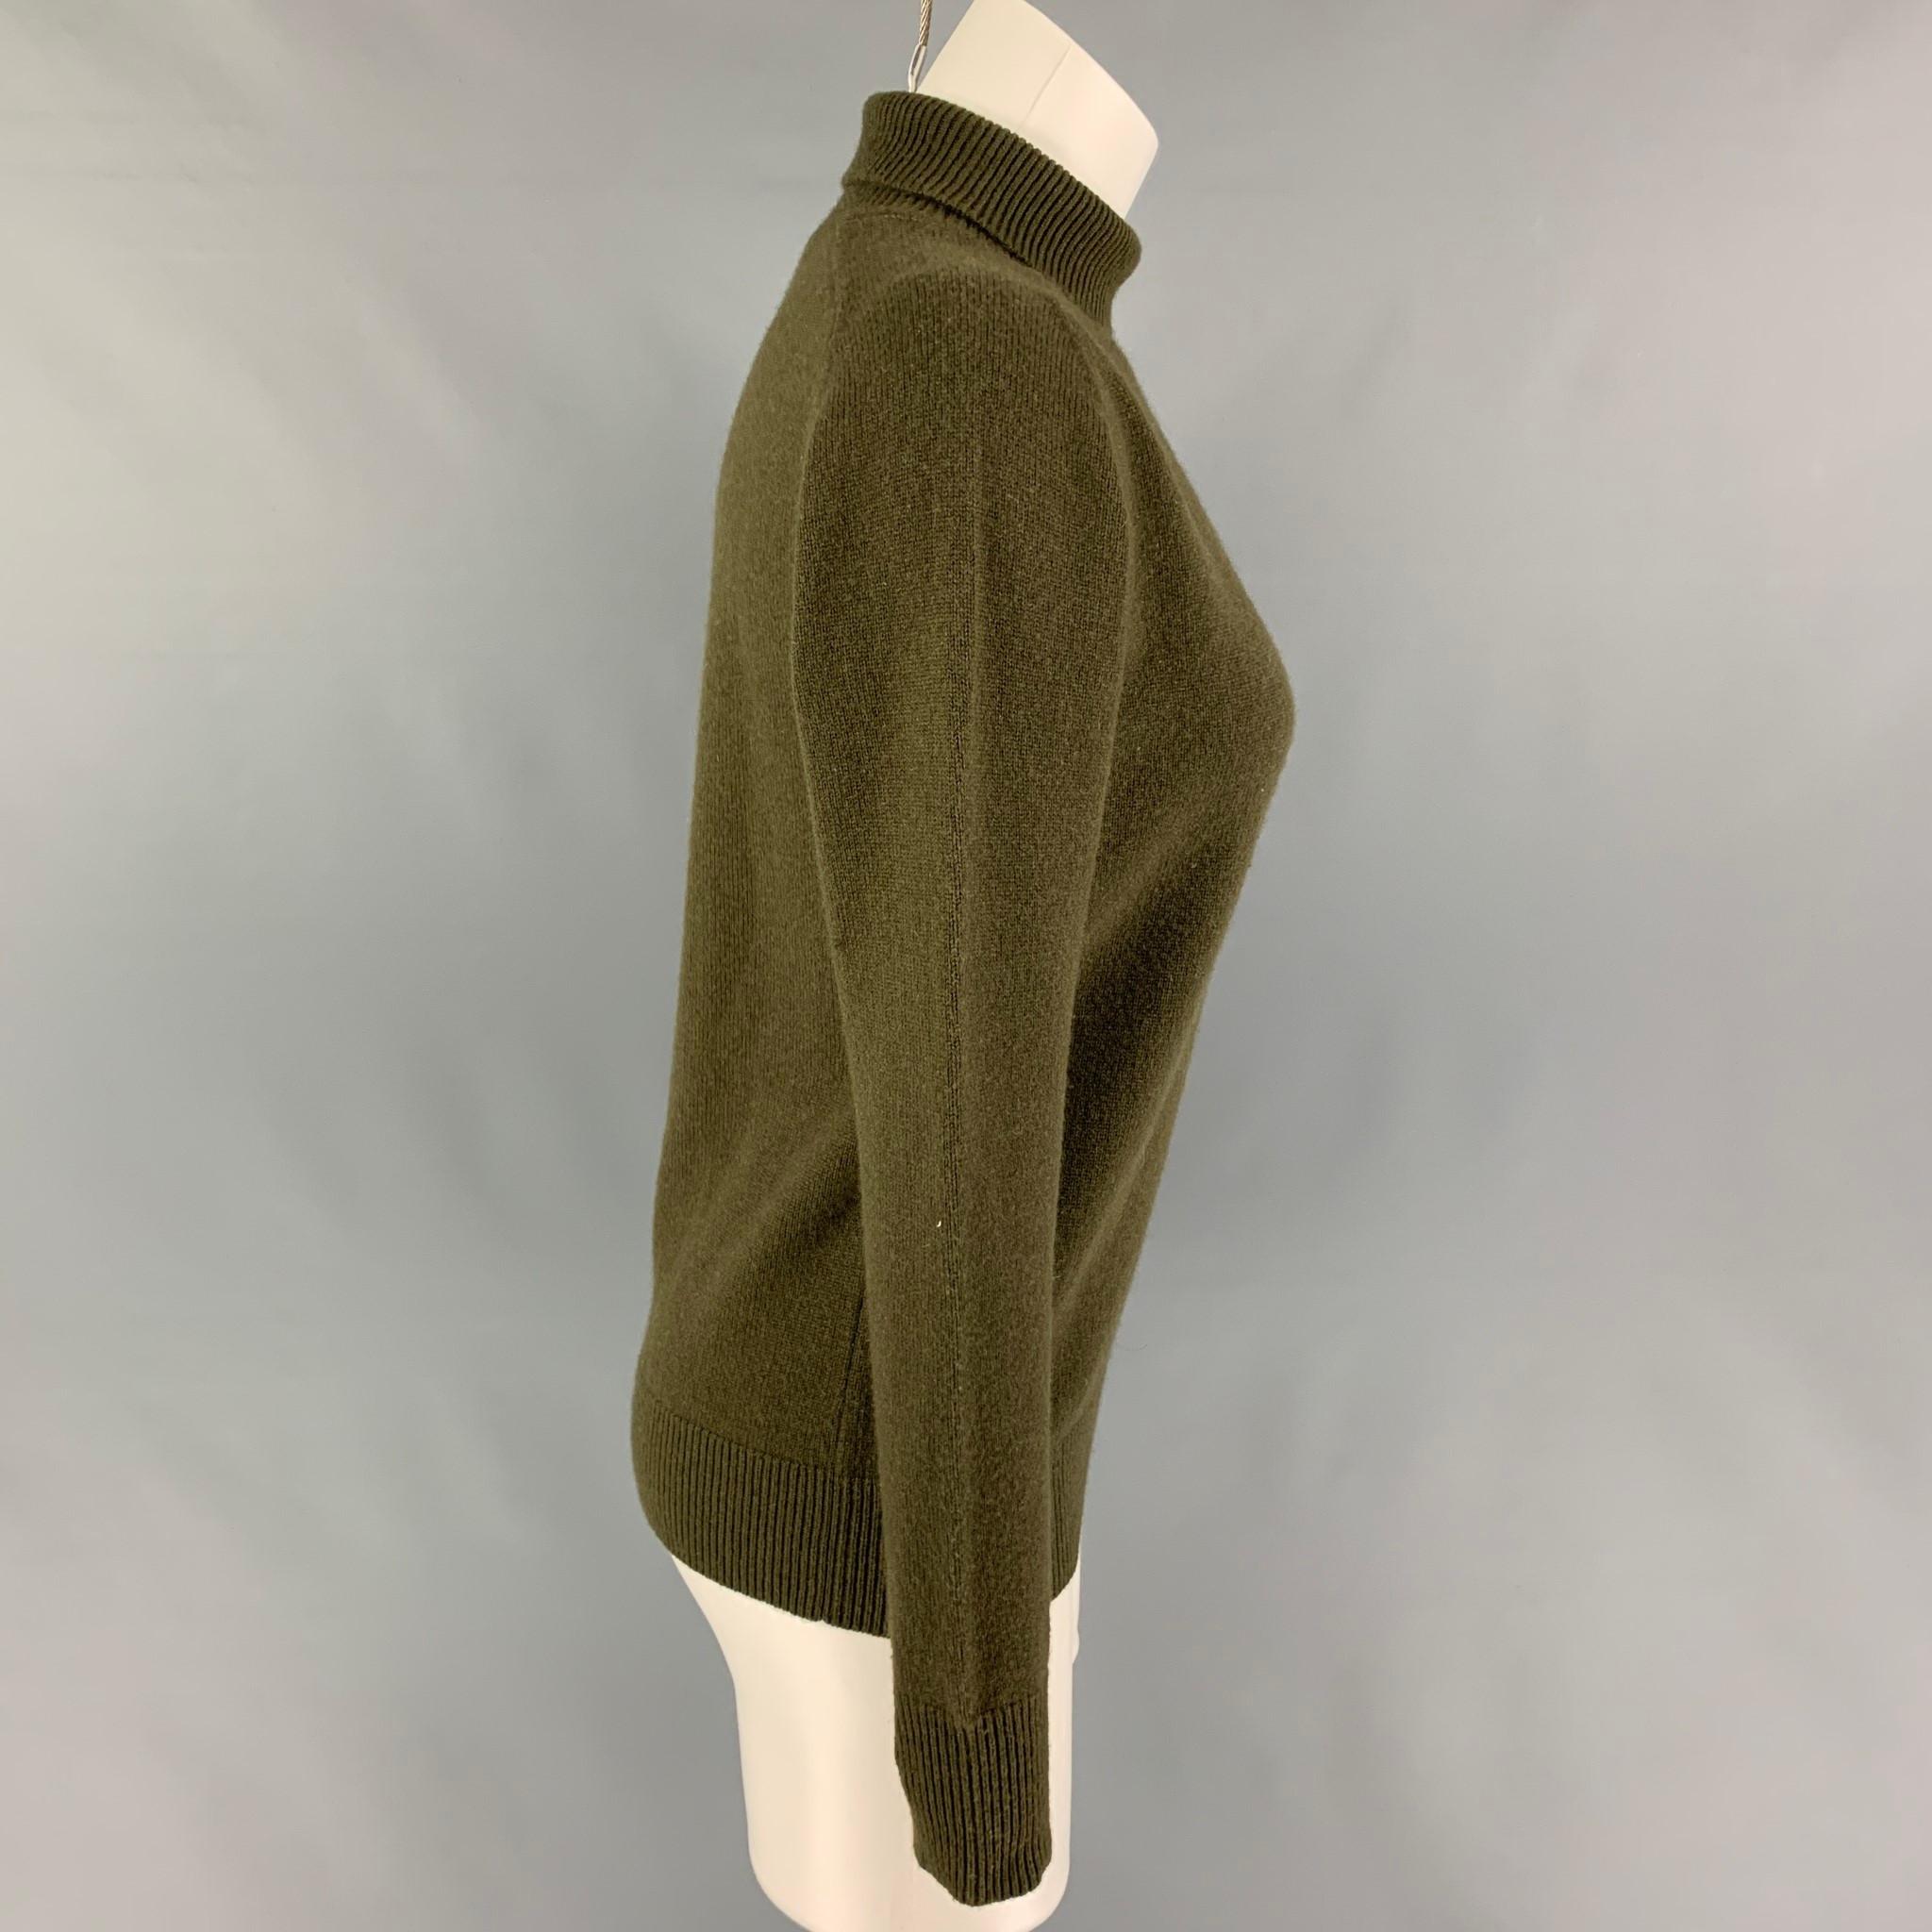 VICTORIA BECKHAM sweater comes in a olive cashmere featuring a turtleneck style and long sleeves. 

Very Good Pre-Owned Condition.
Marked: 1
Original Retail Price: $410.00

Measurements:

Shoulder: 16 in.
Bust: 36 in.
Sleeve: 22.5 in.
Length: 22.5